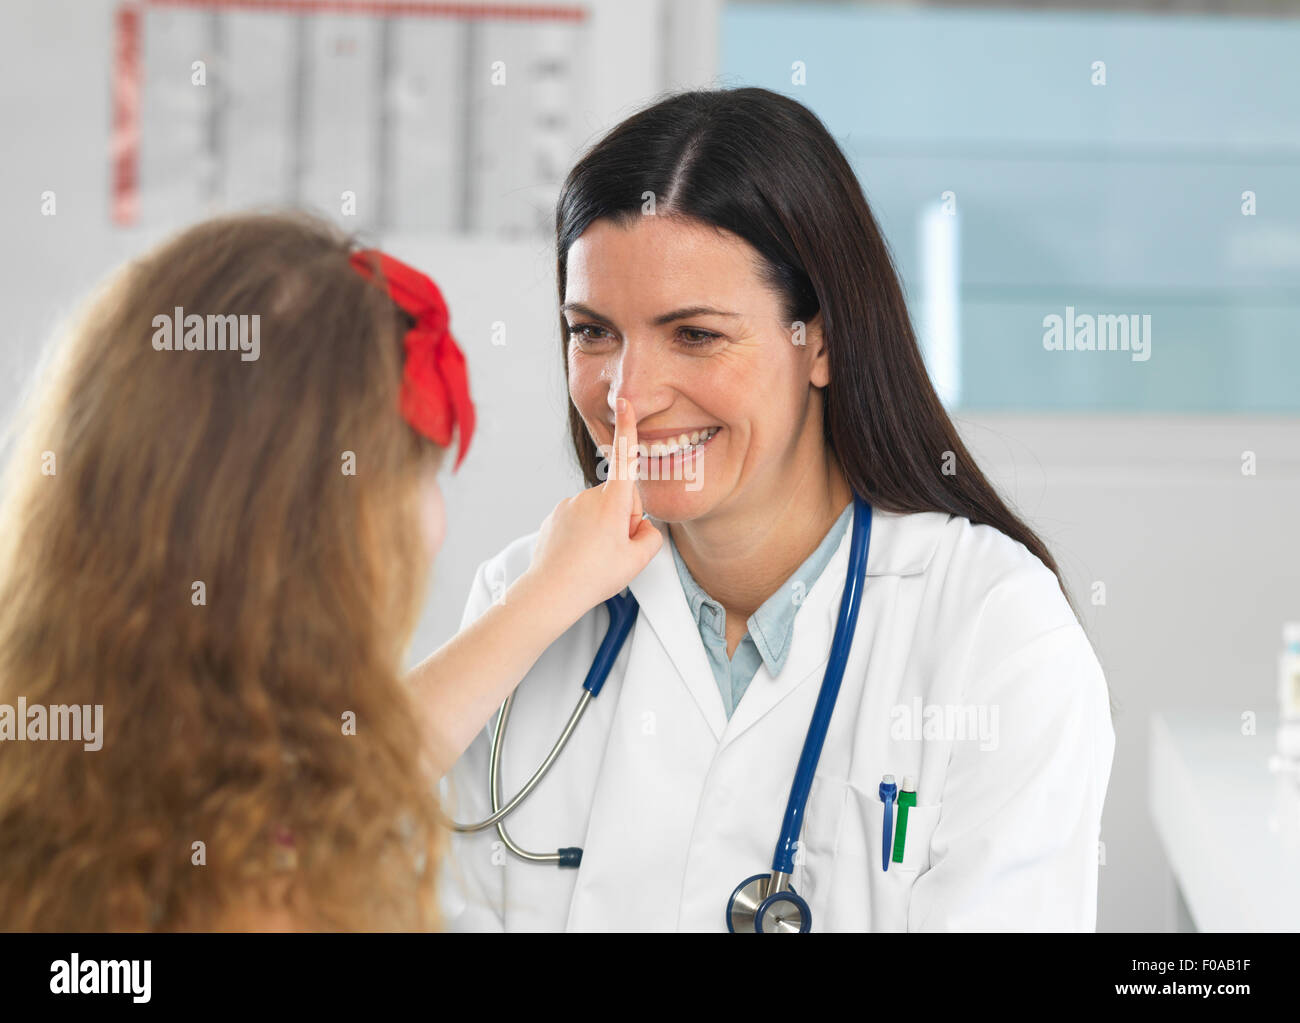 Doctor bonding with young girl during consultation Stock Photo